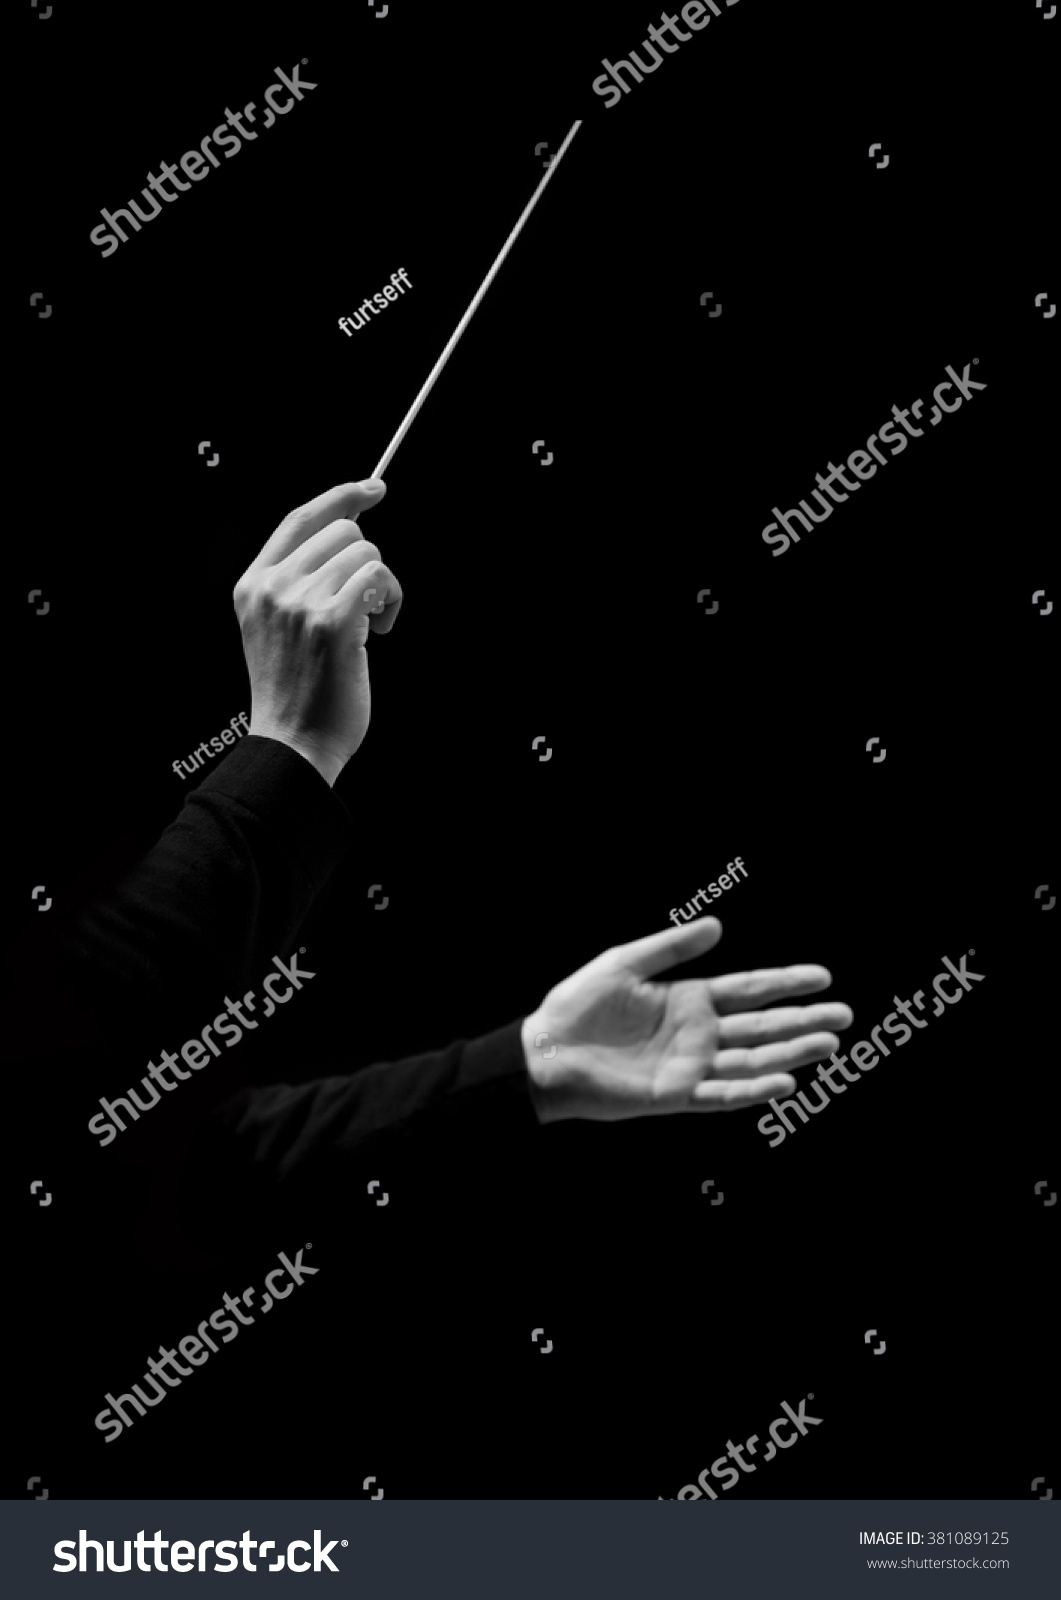 Hands Conductor On Black Background Black Stock Photo 381089125